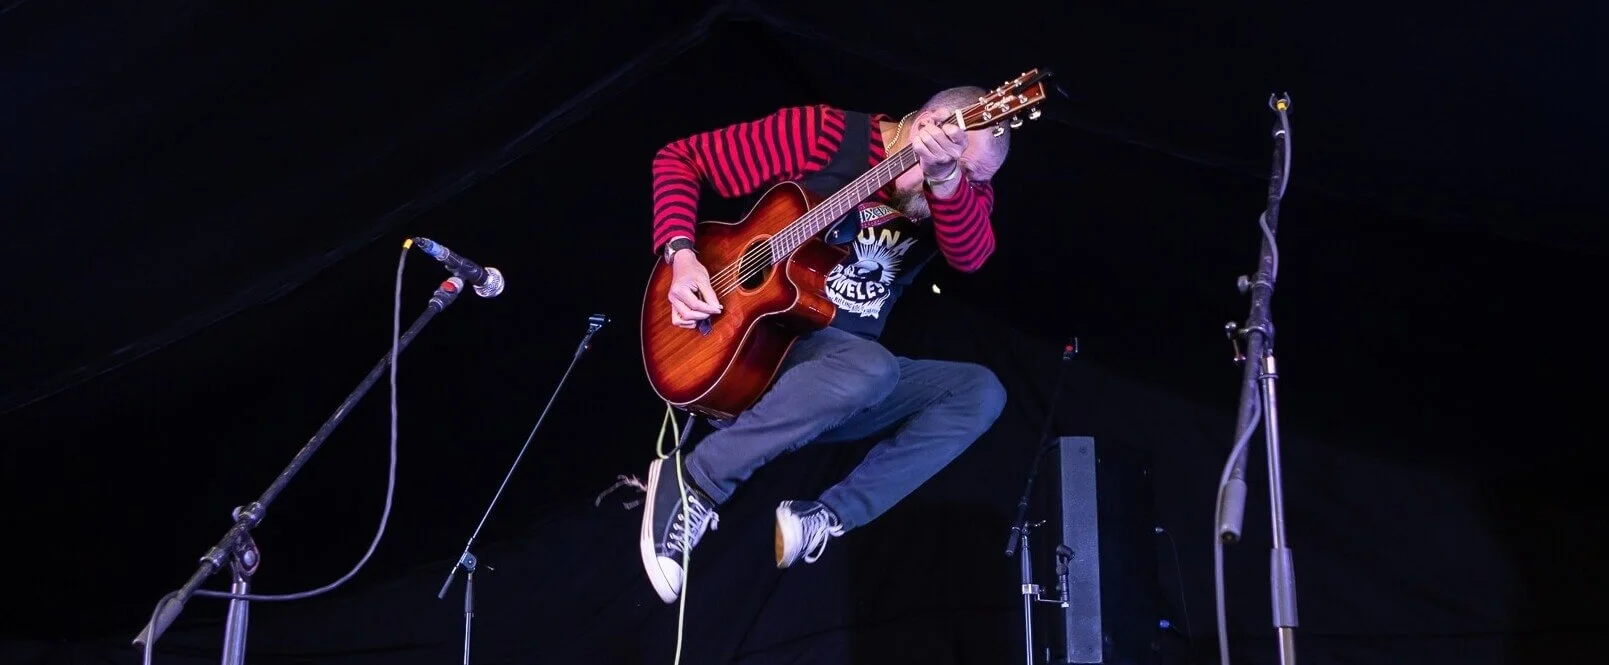 A dynamic performer in a striped red and black sweater and blue pants playing an acoustic guitar mid-jump on a dimly lit stage, with microphones and stands in the foreground against a dark background.